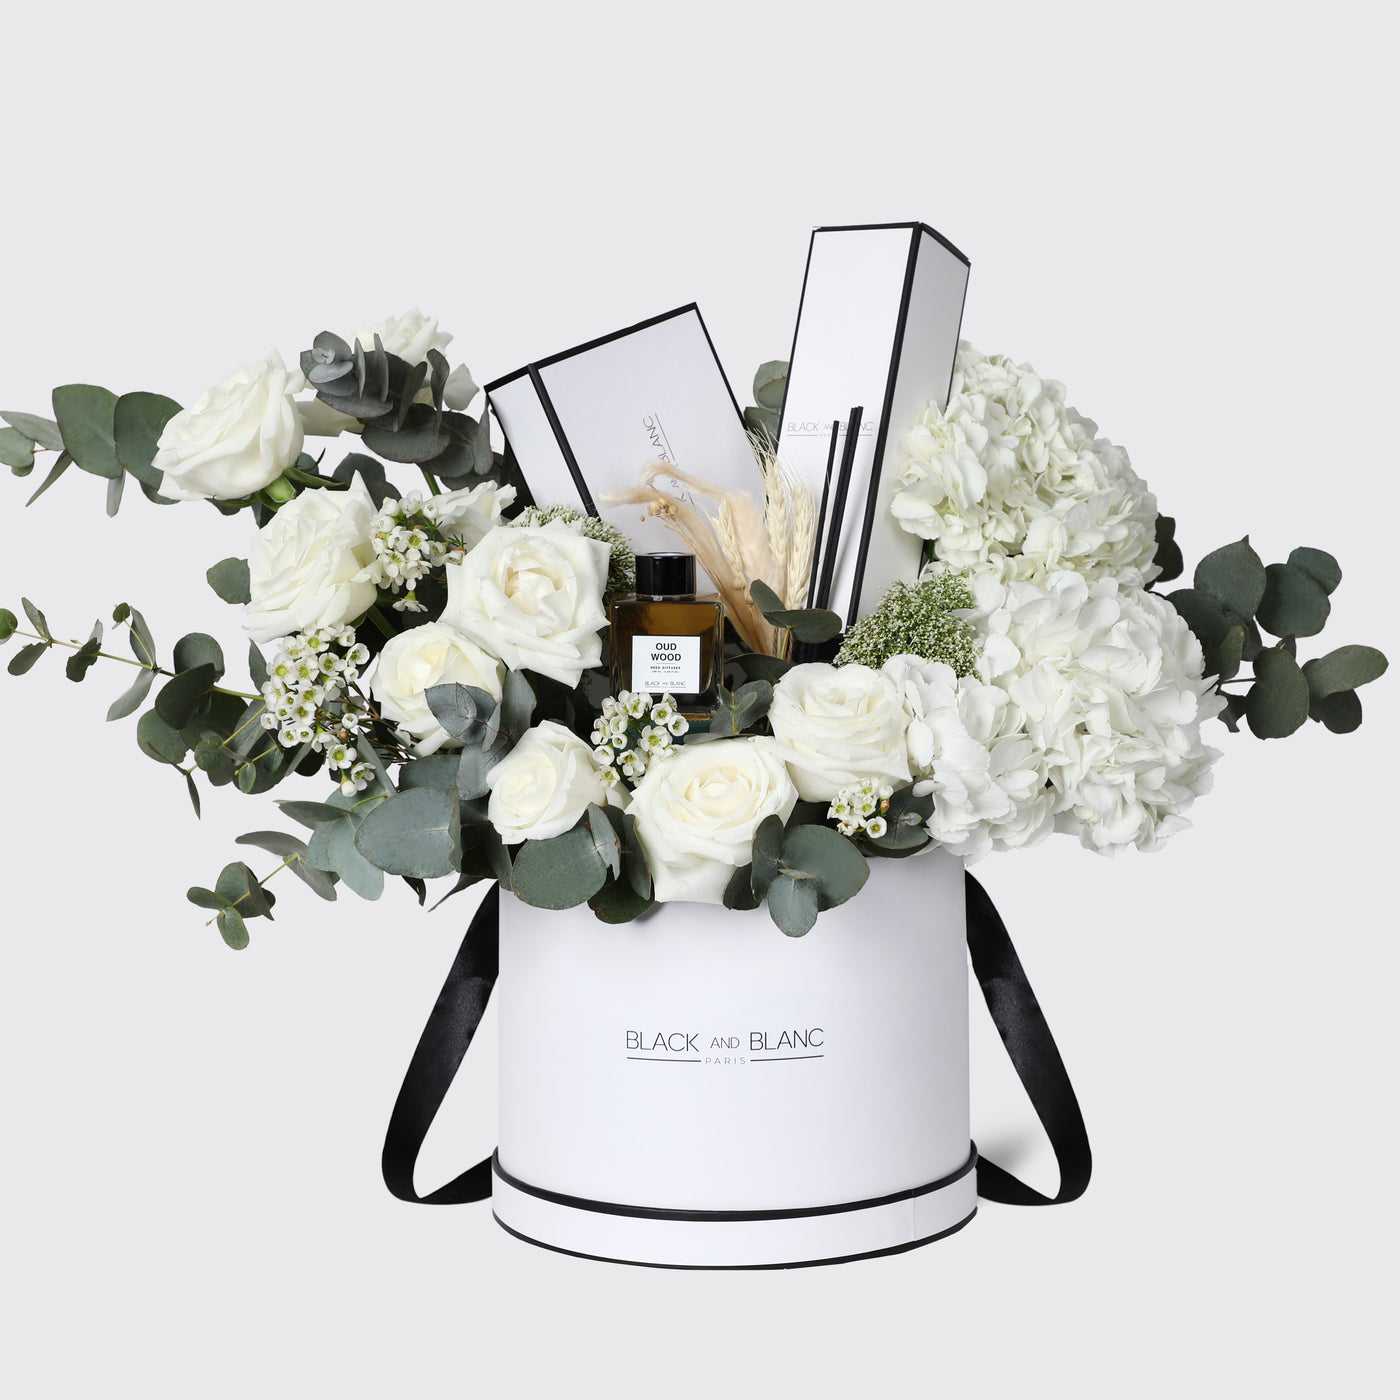 BLACK AND BLANC Reed Diffuser & Chocolate Almonds